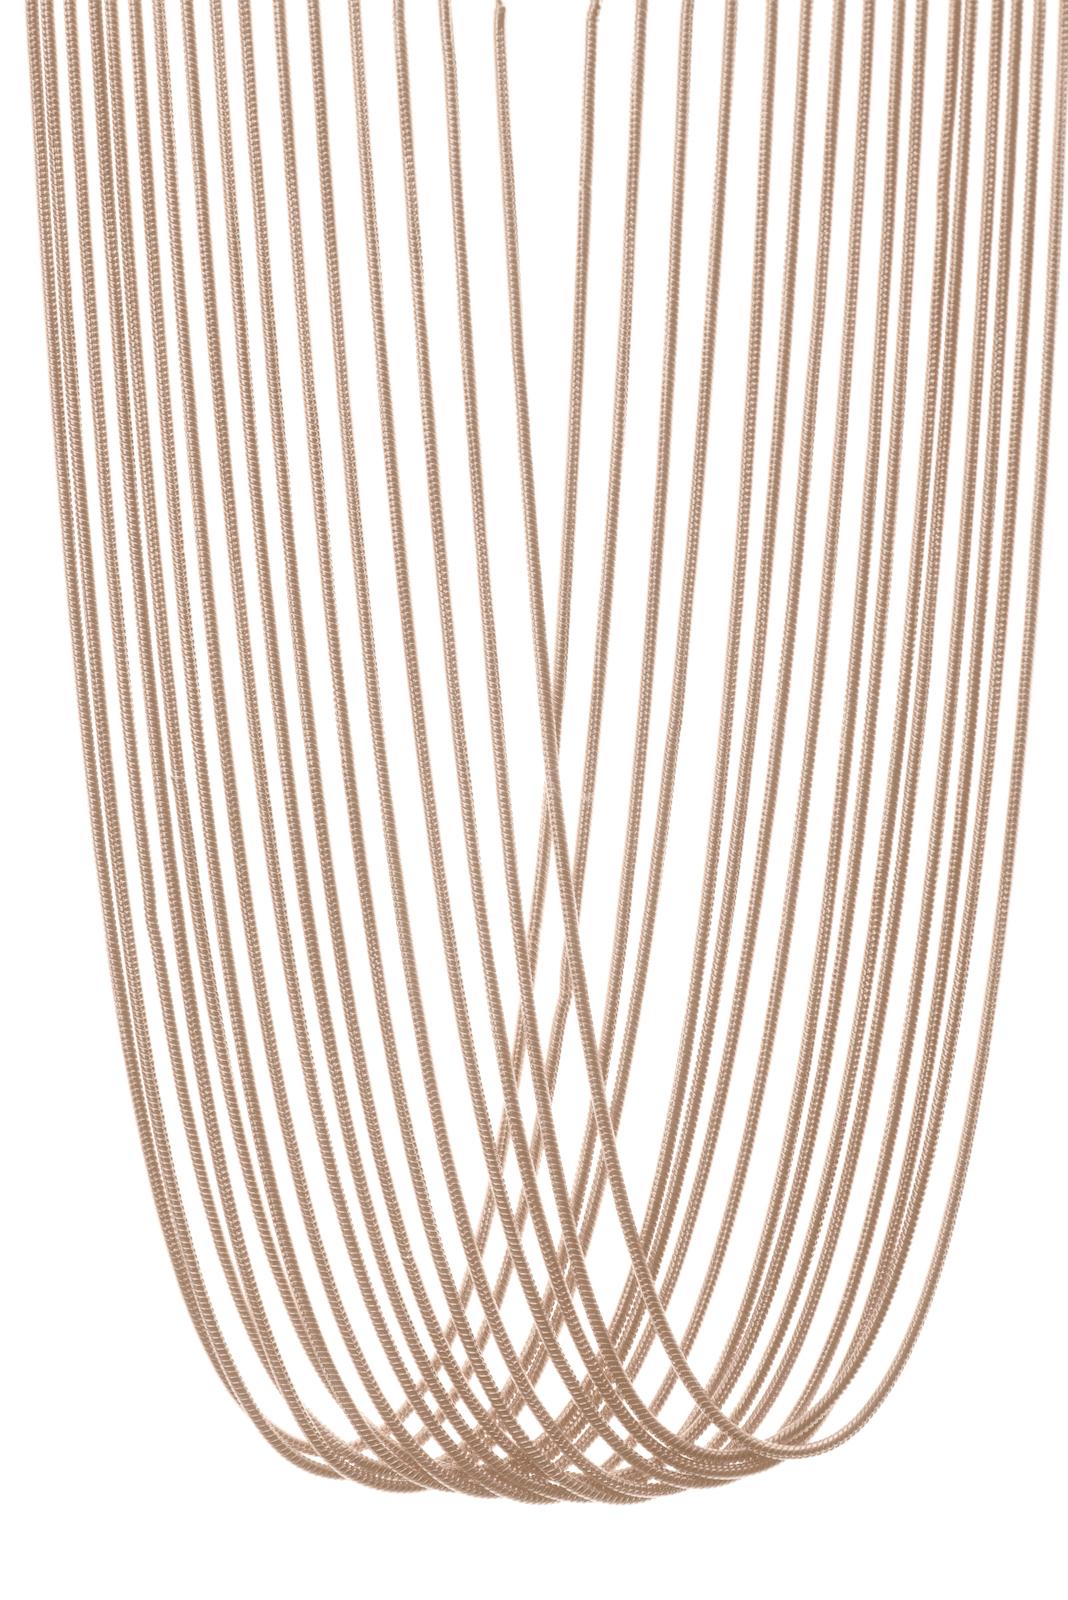 18 karat rose gold plated brass statement necklace created to compliment and curess a woman's neckline. The movement of the snake chain creates a shiny liquid effect offering a very strong look. Every chain has been individually hand-cut and placed